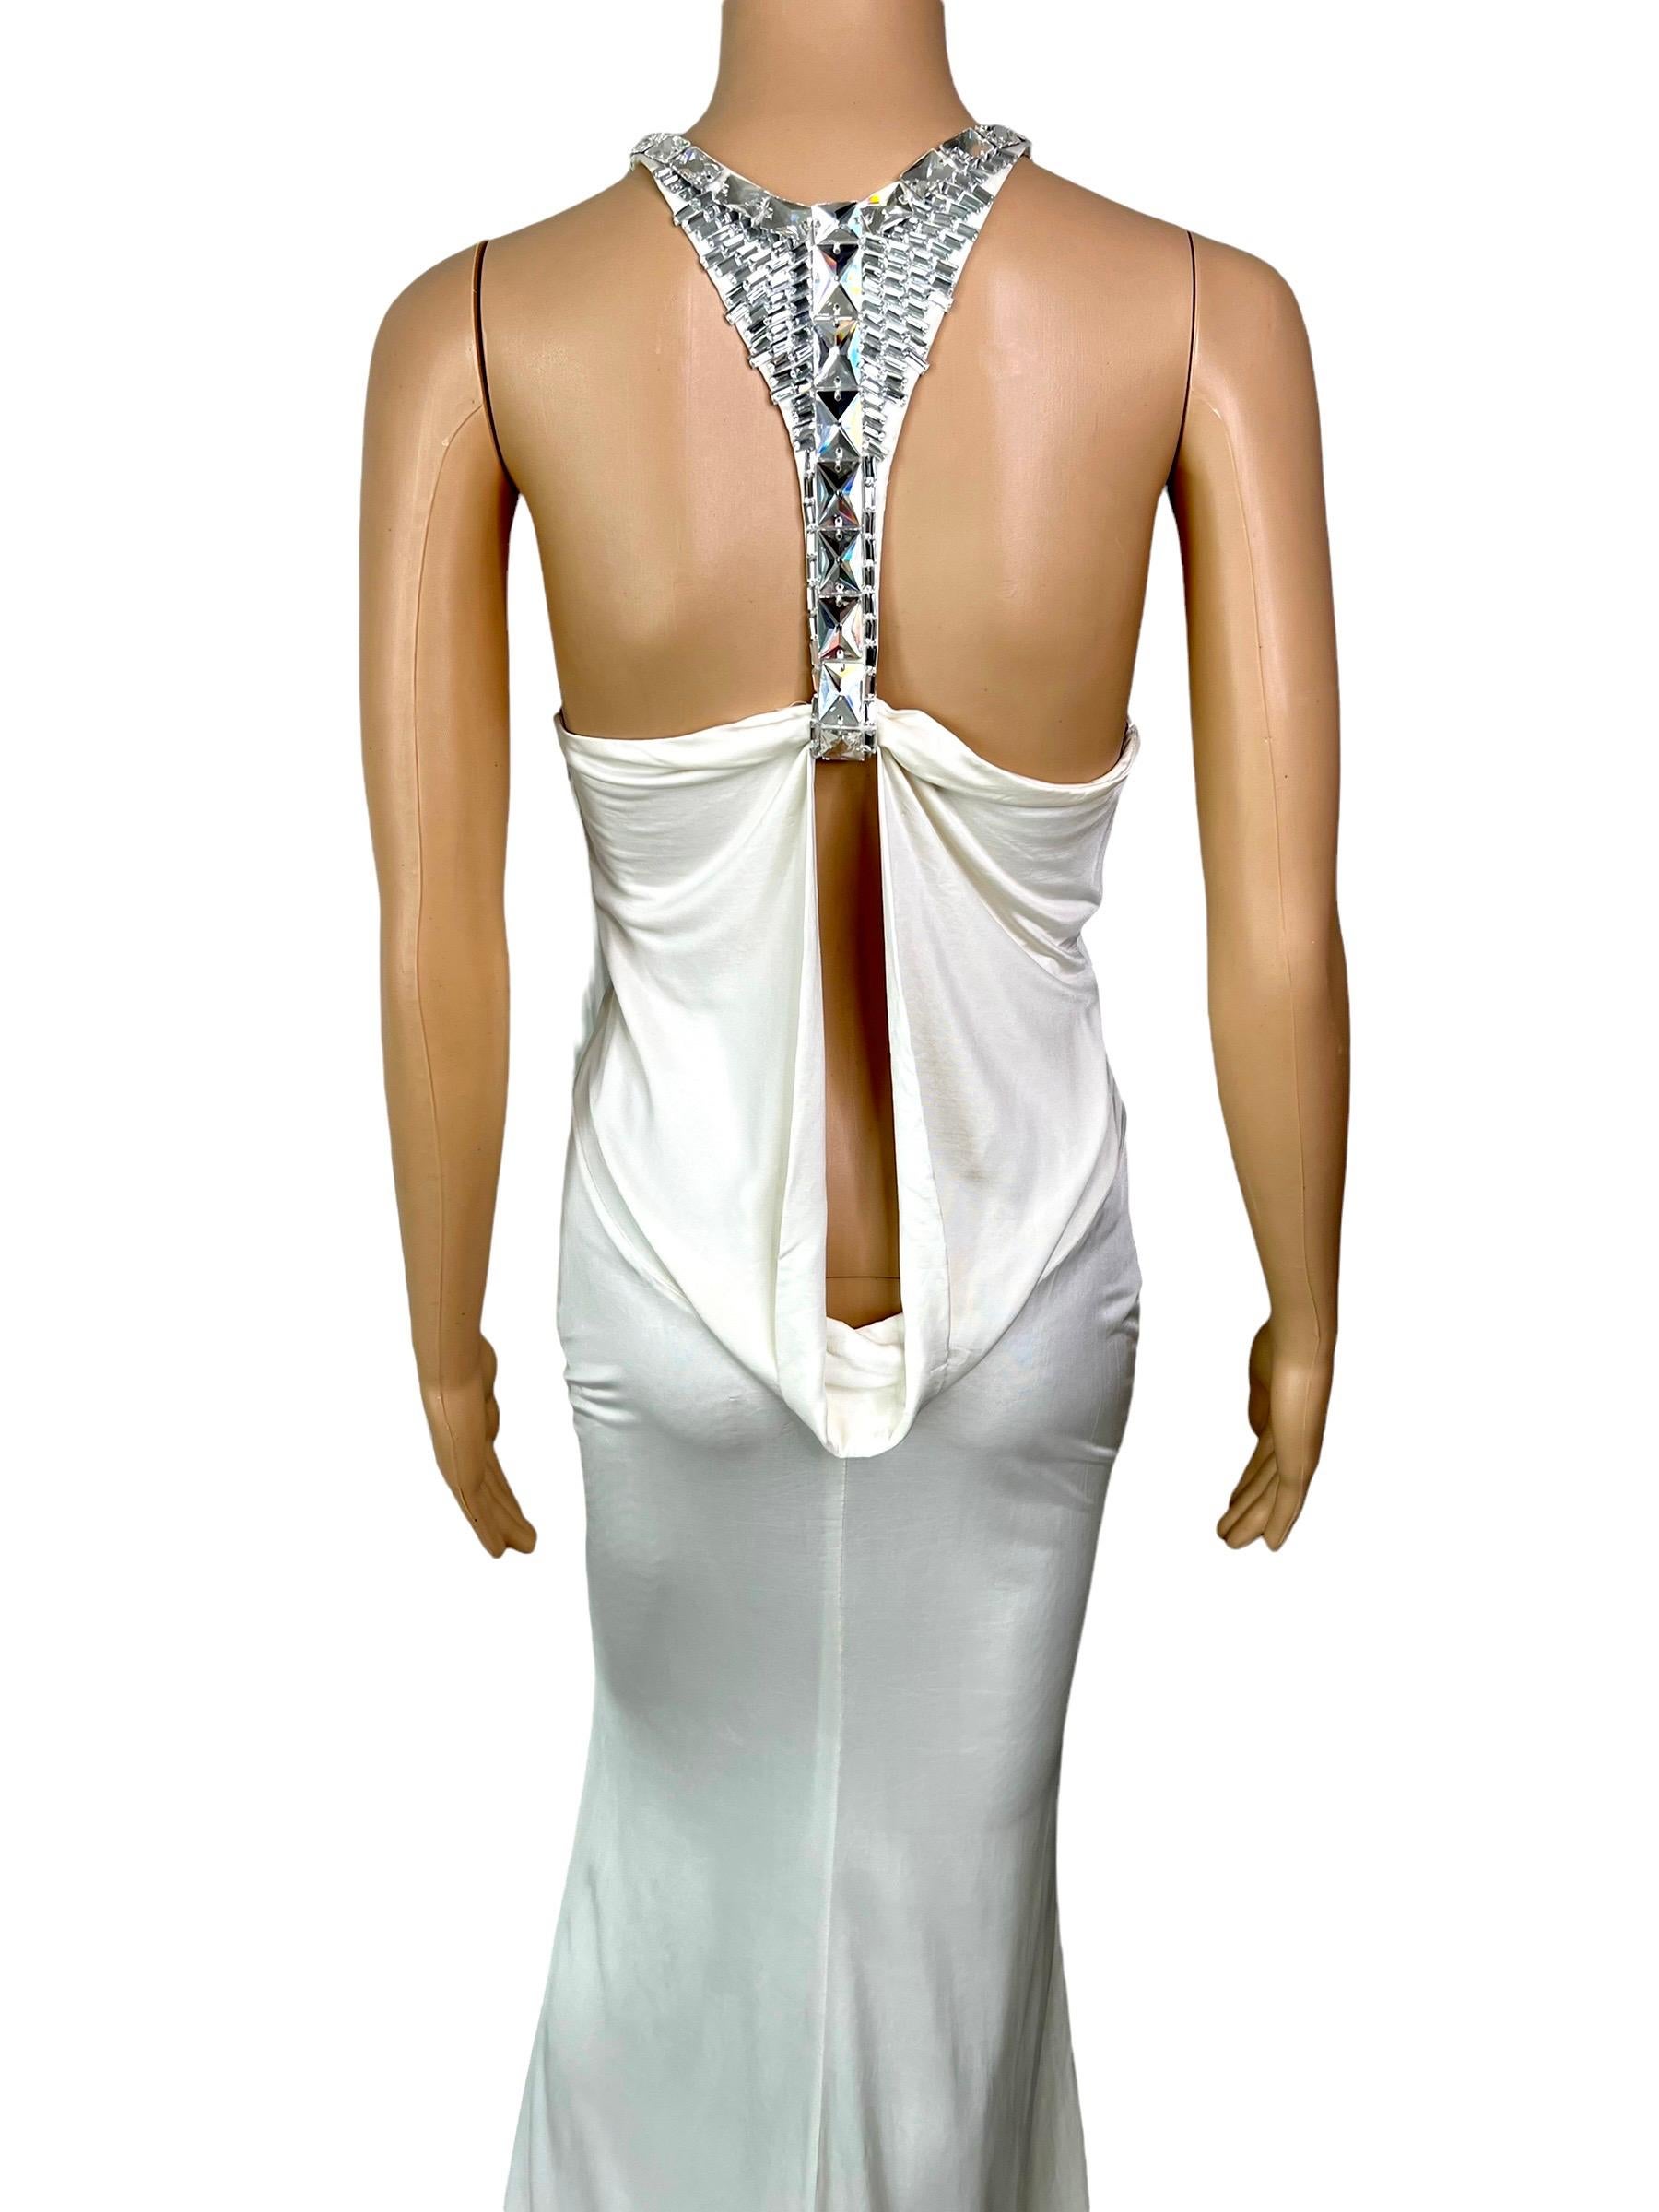 Tom Ford for Gucci F/W 2004 Embellished Plunging Cutout Ivory Evening Dress Gown For Sale 11